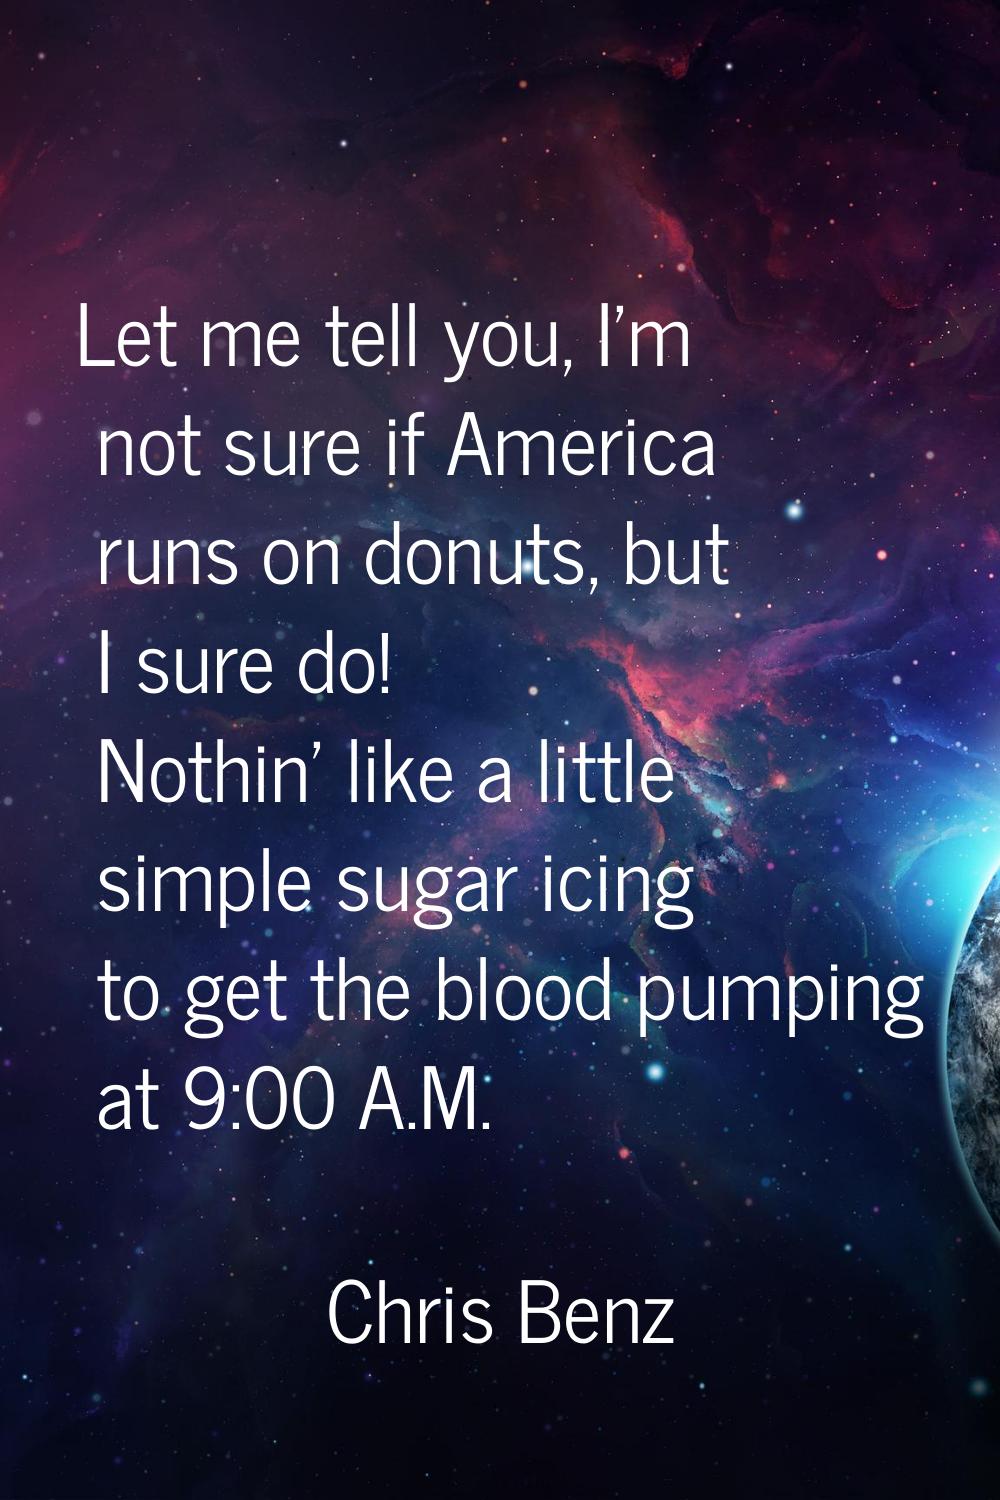 Let me tell you, I'm not sure if America runs on donuts, but I sure do! Nothin' like a little simpl